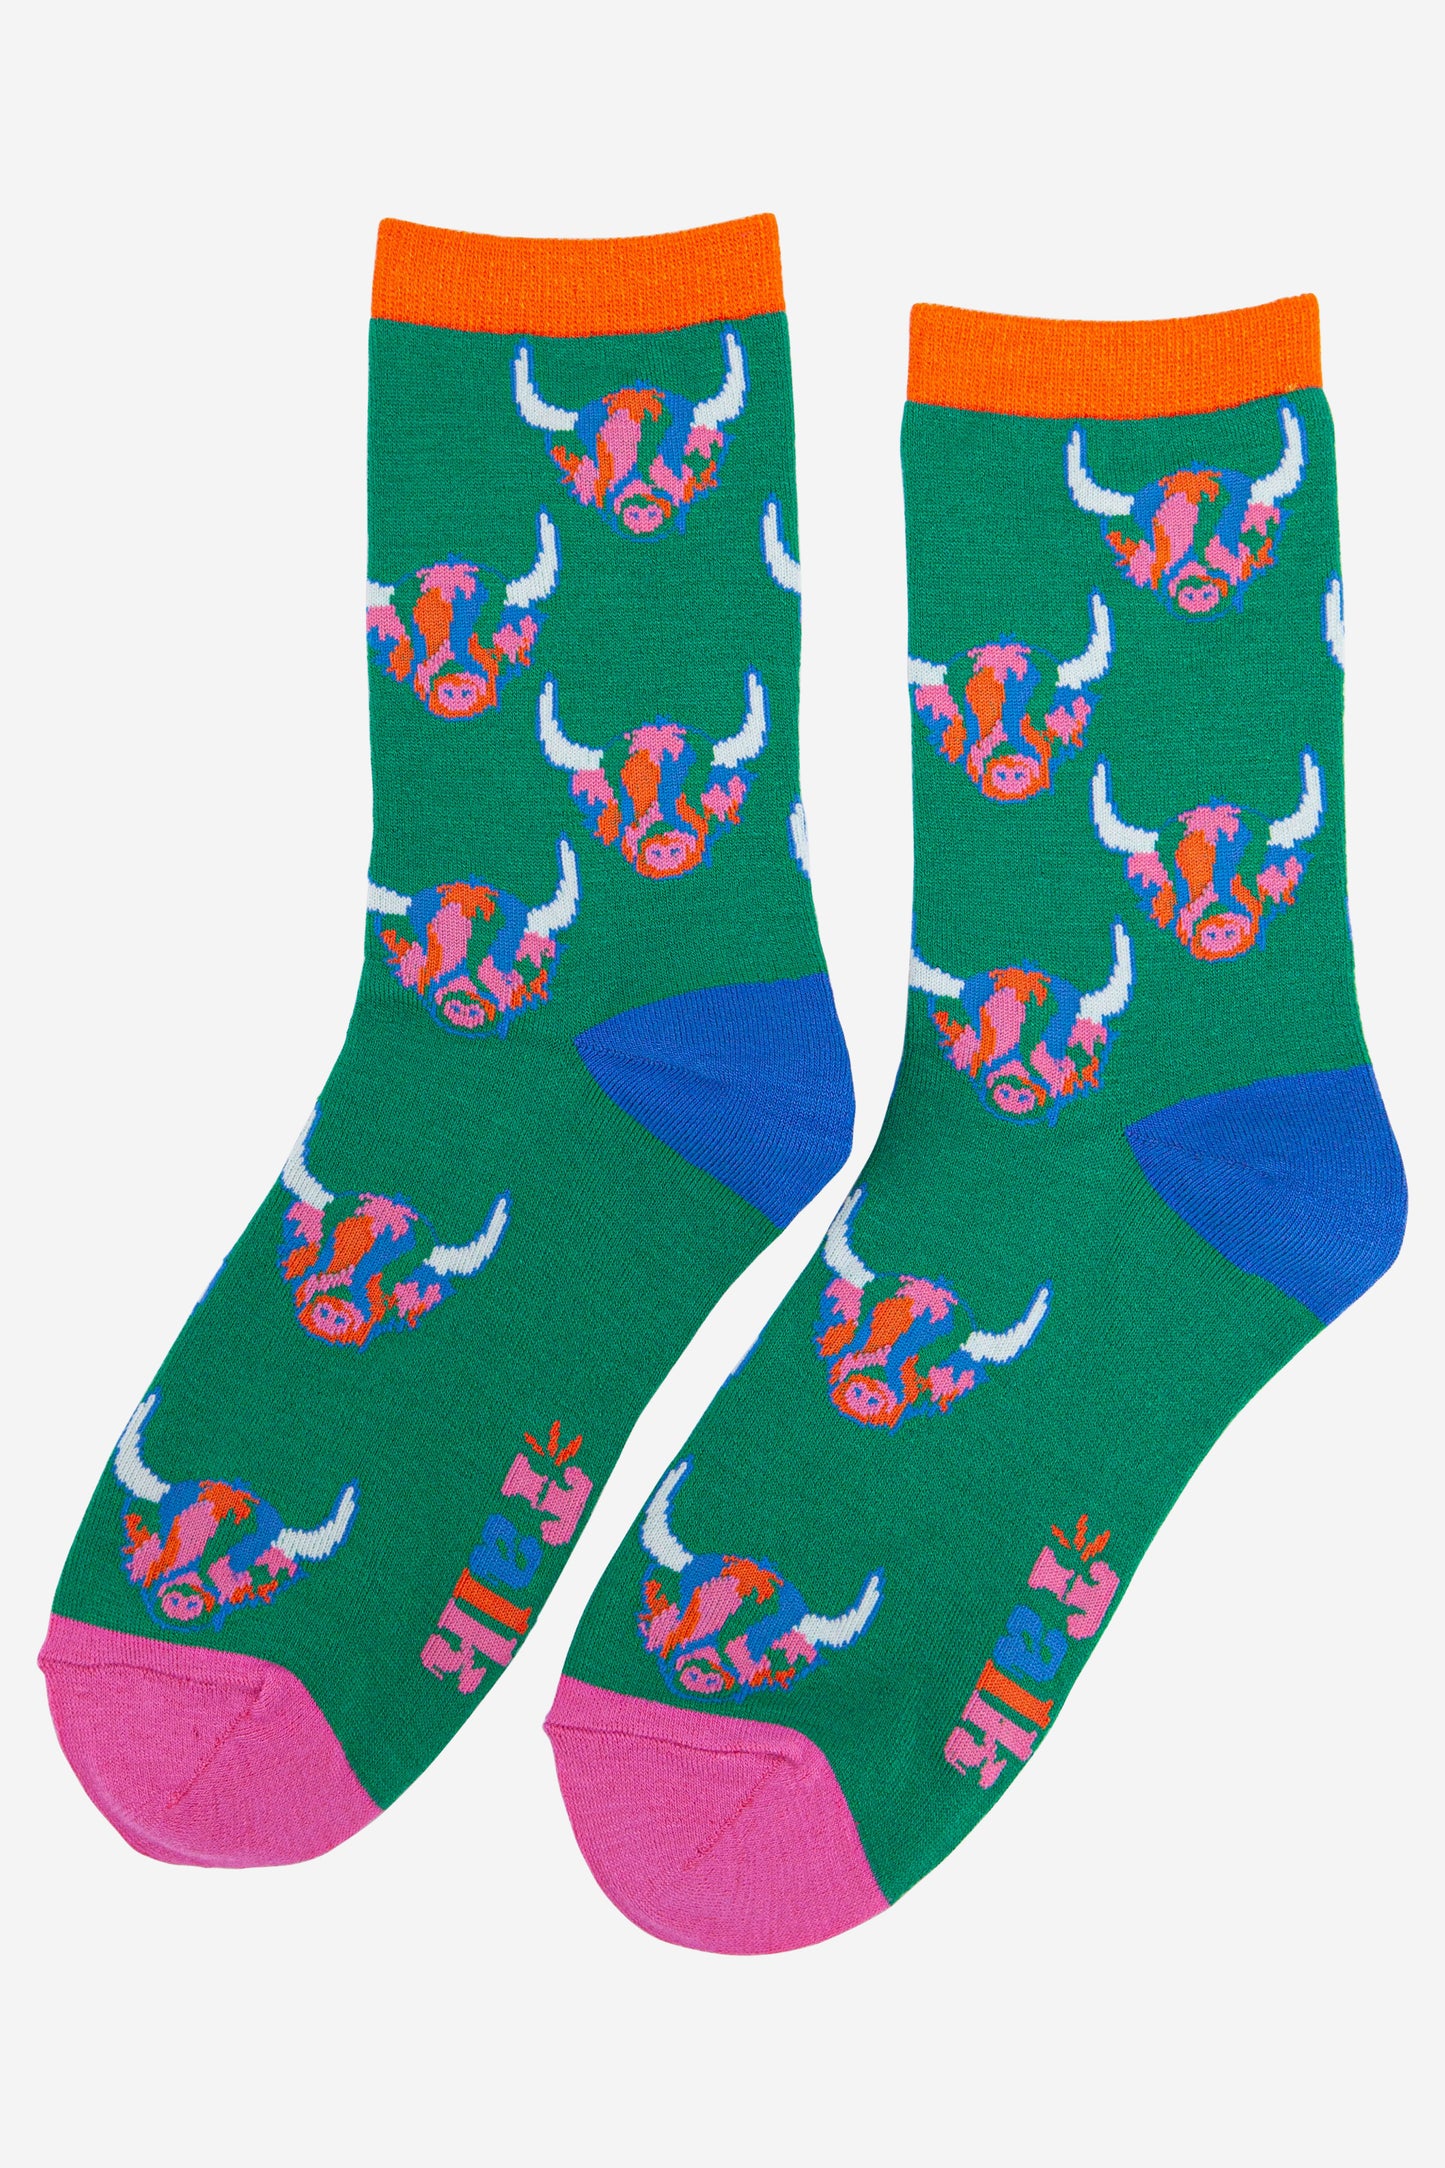 green ankle socks with an orange cuff, blue heel and pink toe with an all over pattern of multi-coloured highland cows